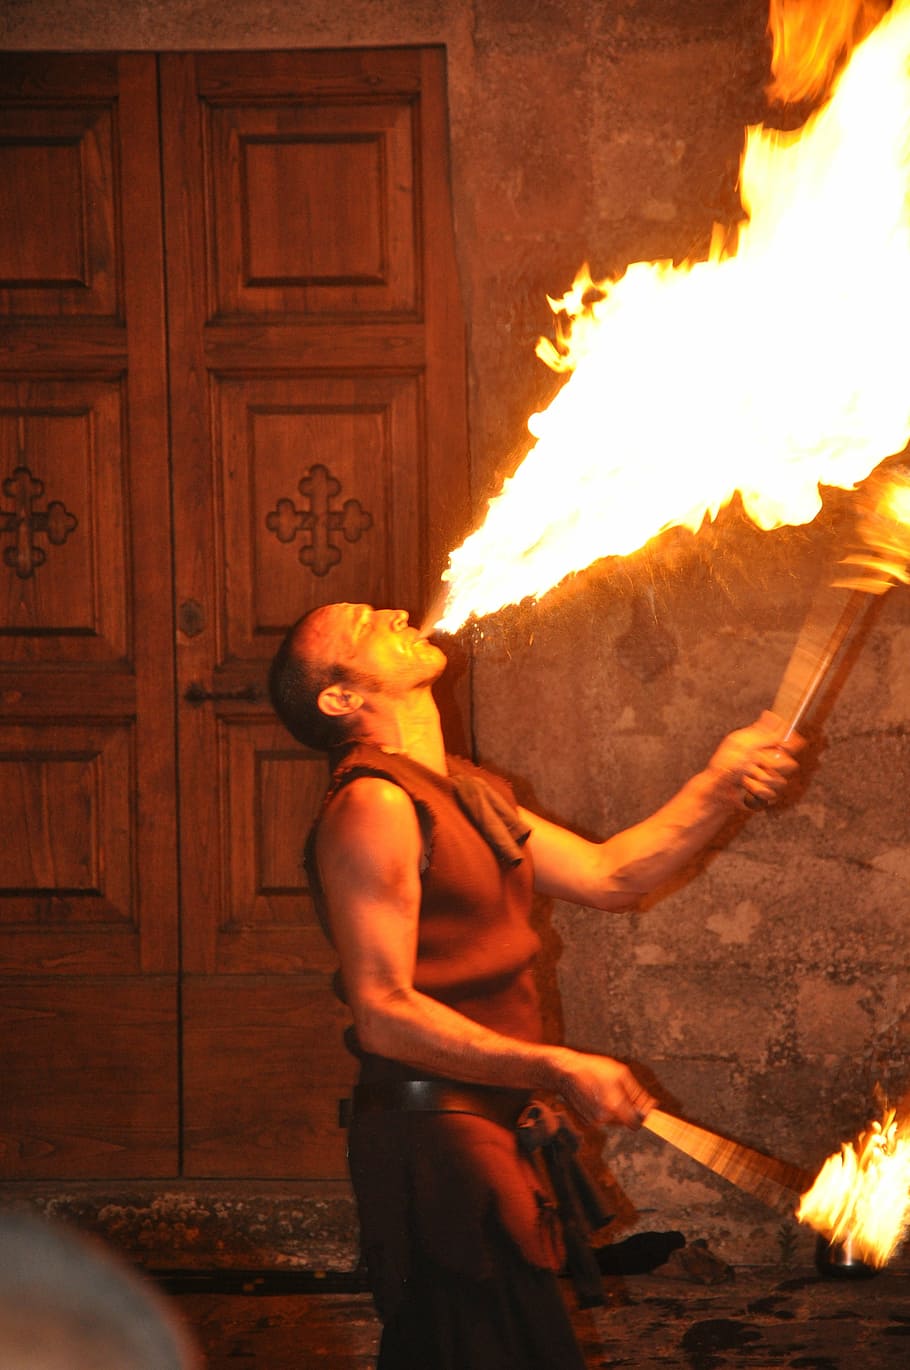 artist, fire, juggler, lucignolo, fire eaters, burning, flame, fire - natural phenomenon, heat - temperature, one person